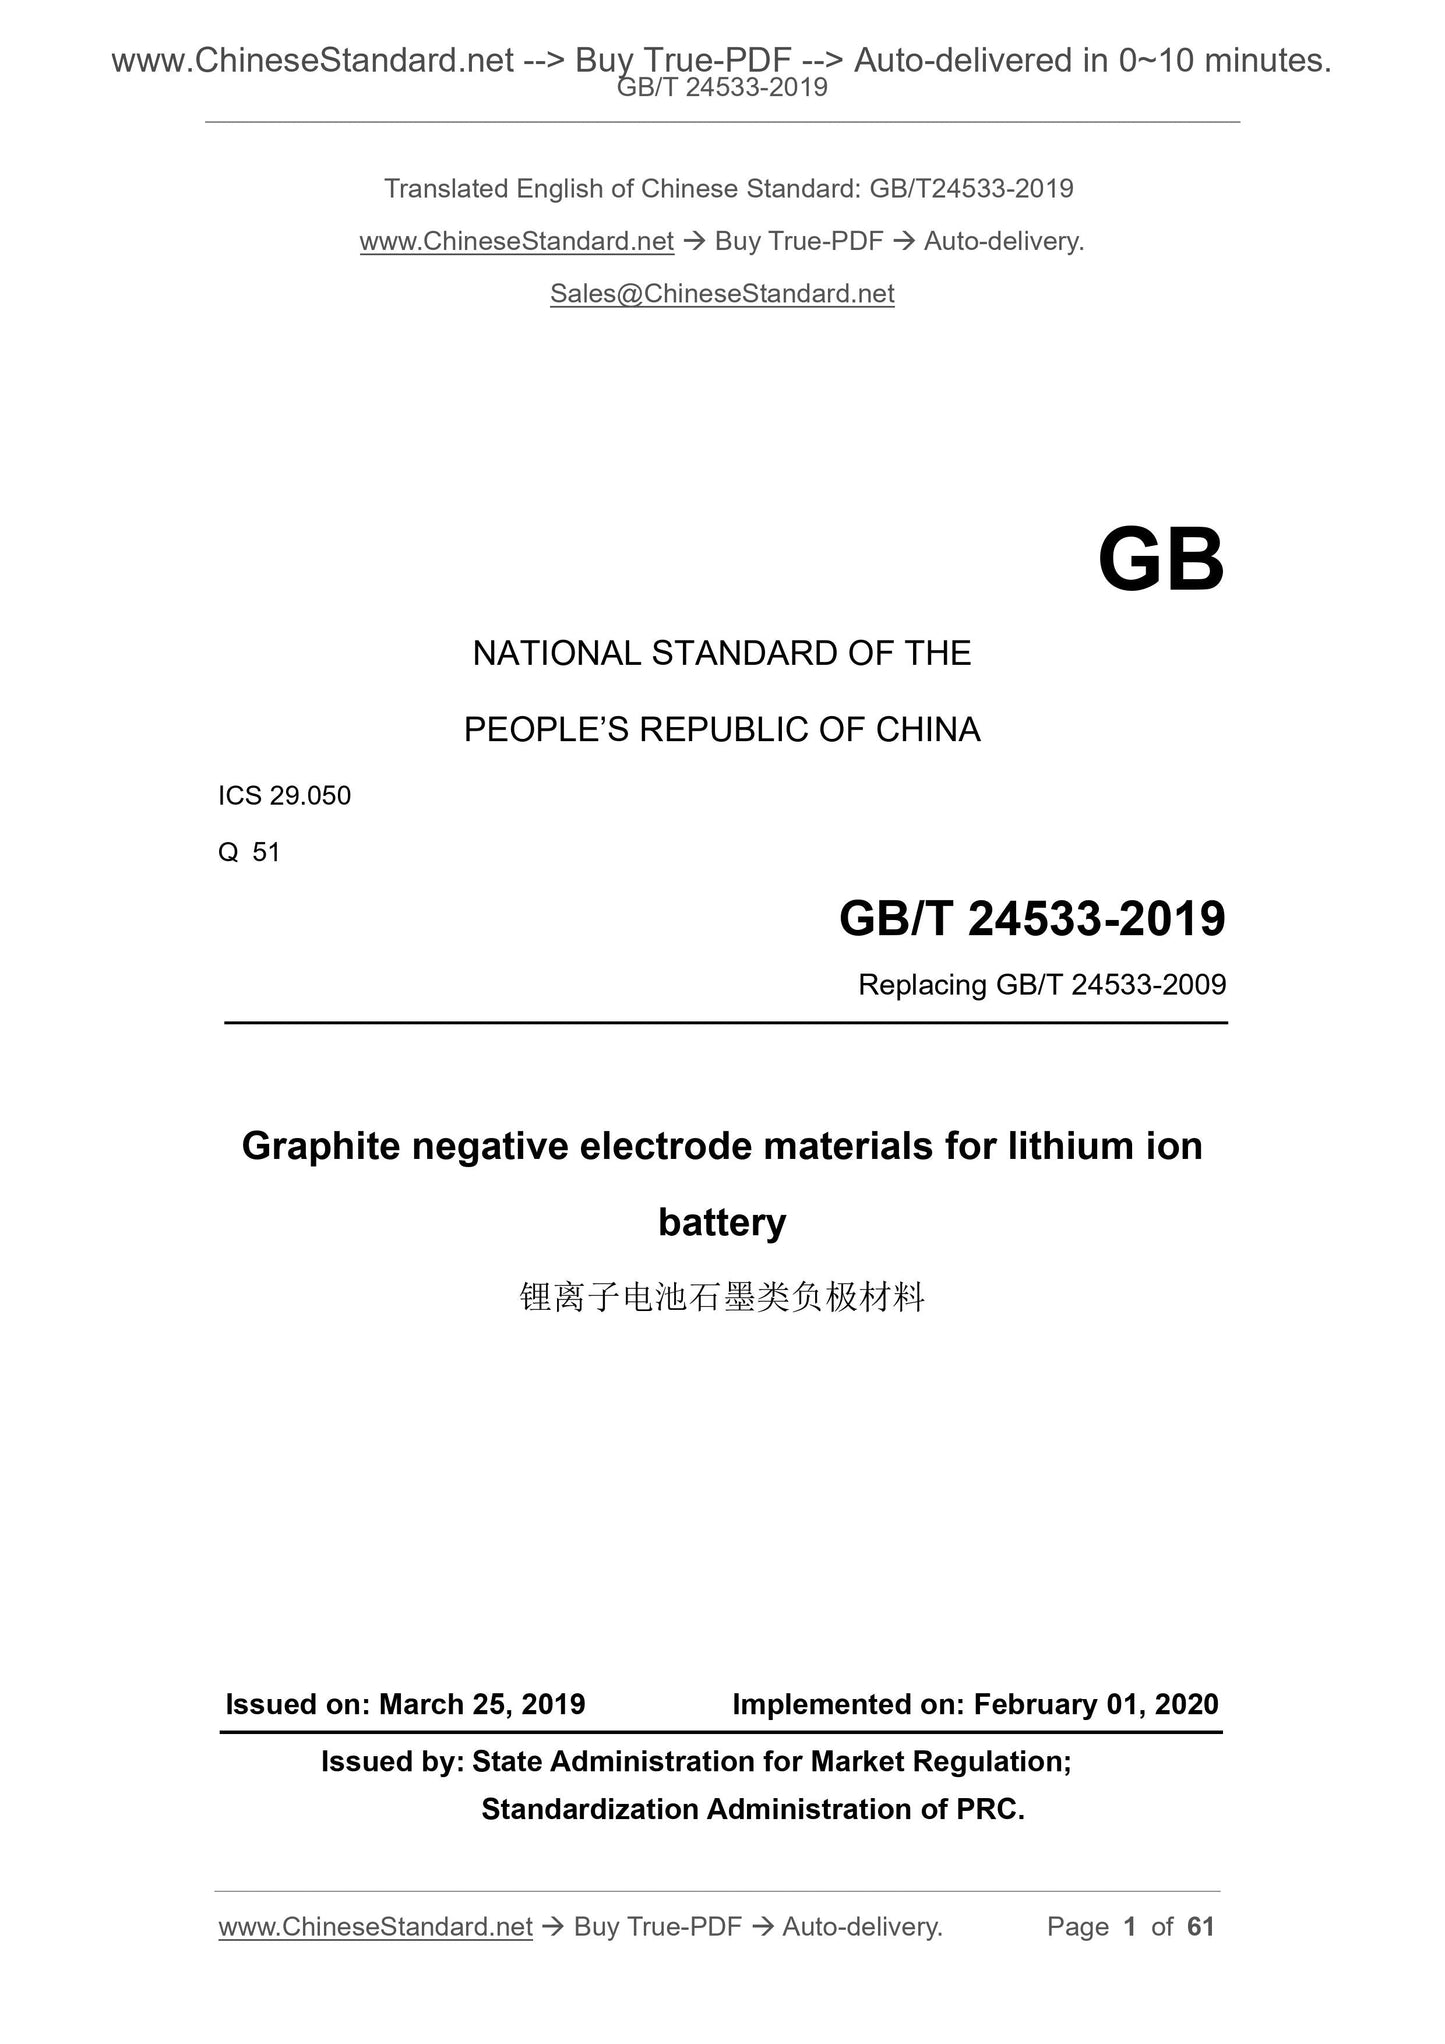 GB/T 24533-2019 Page 1